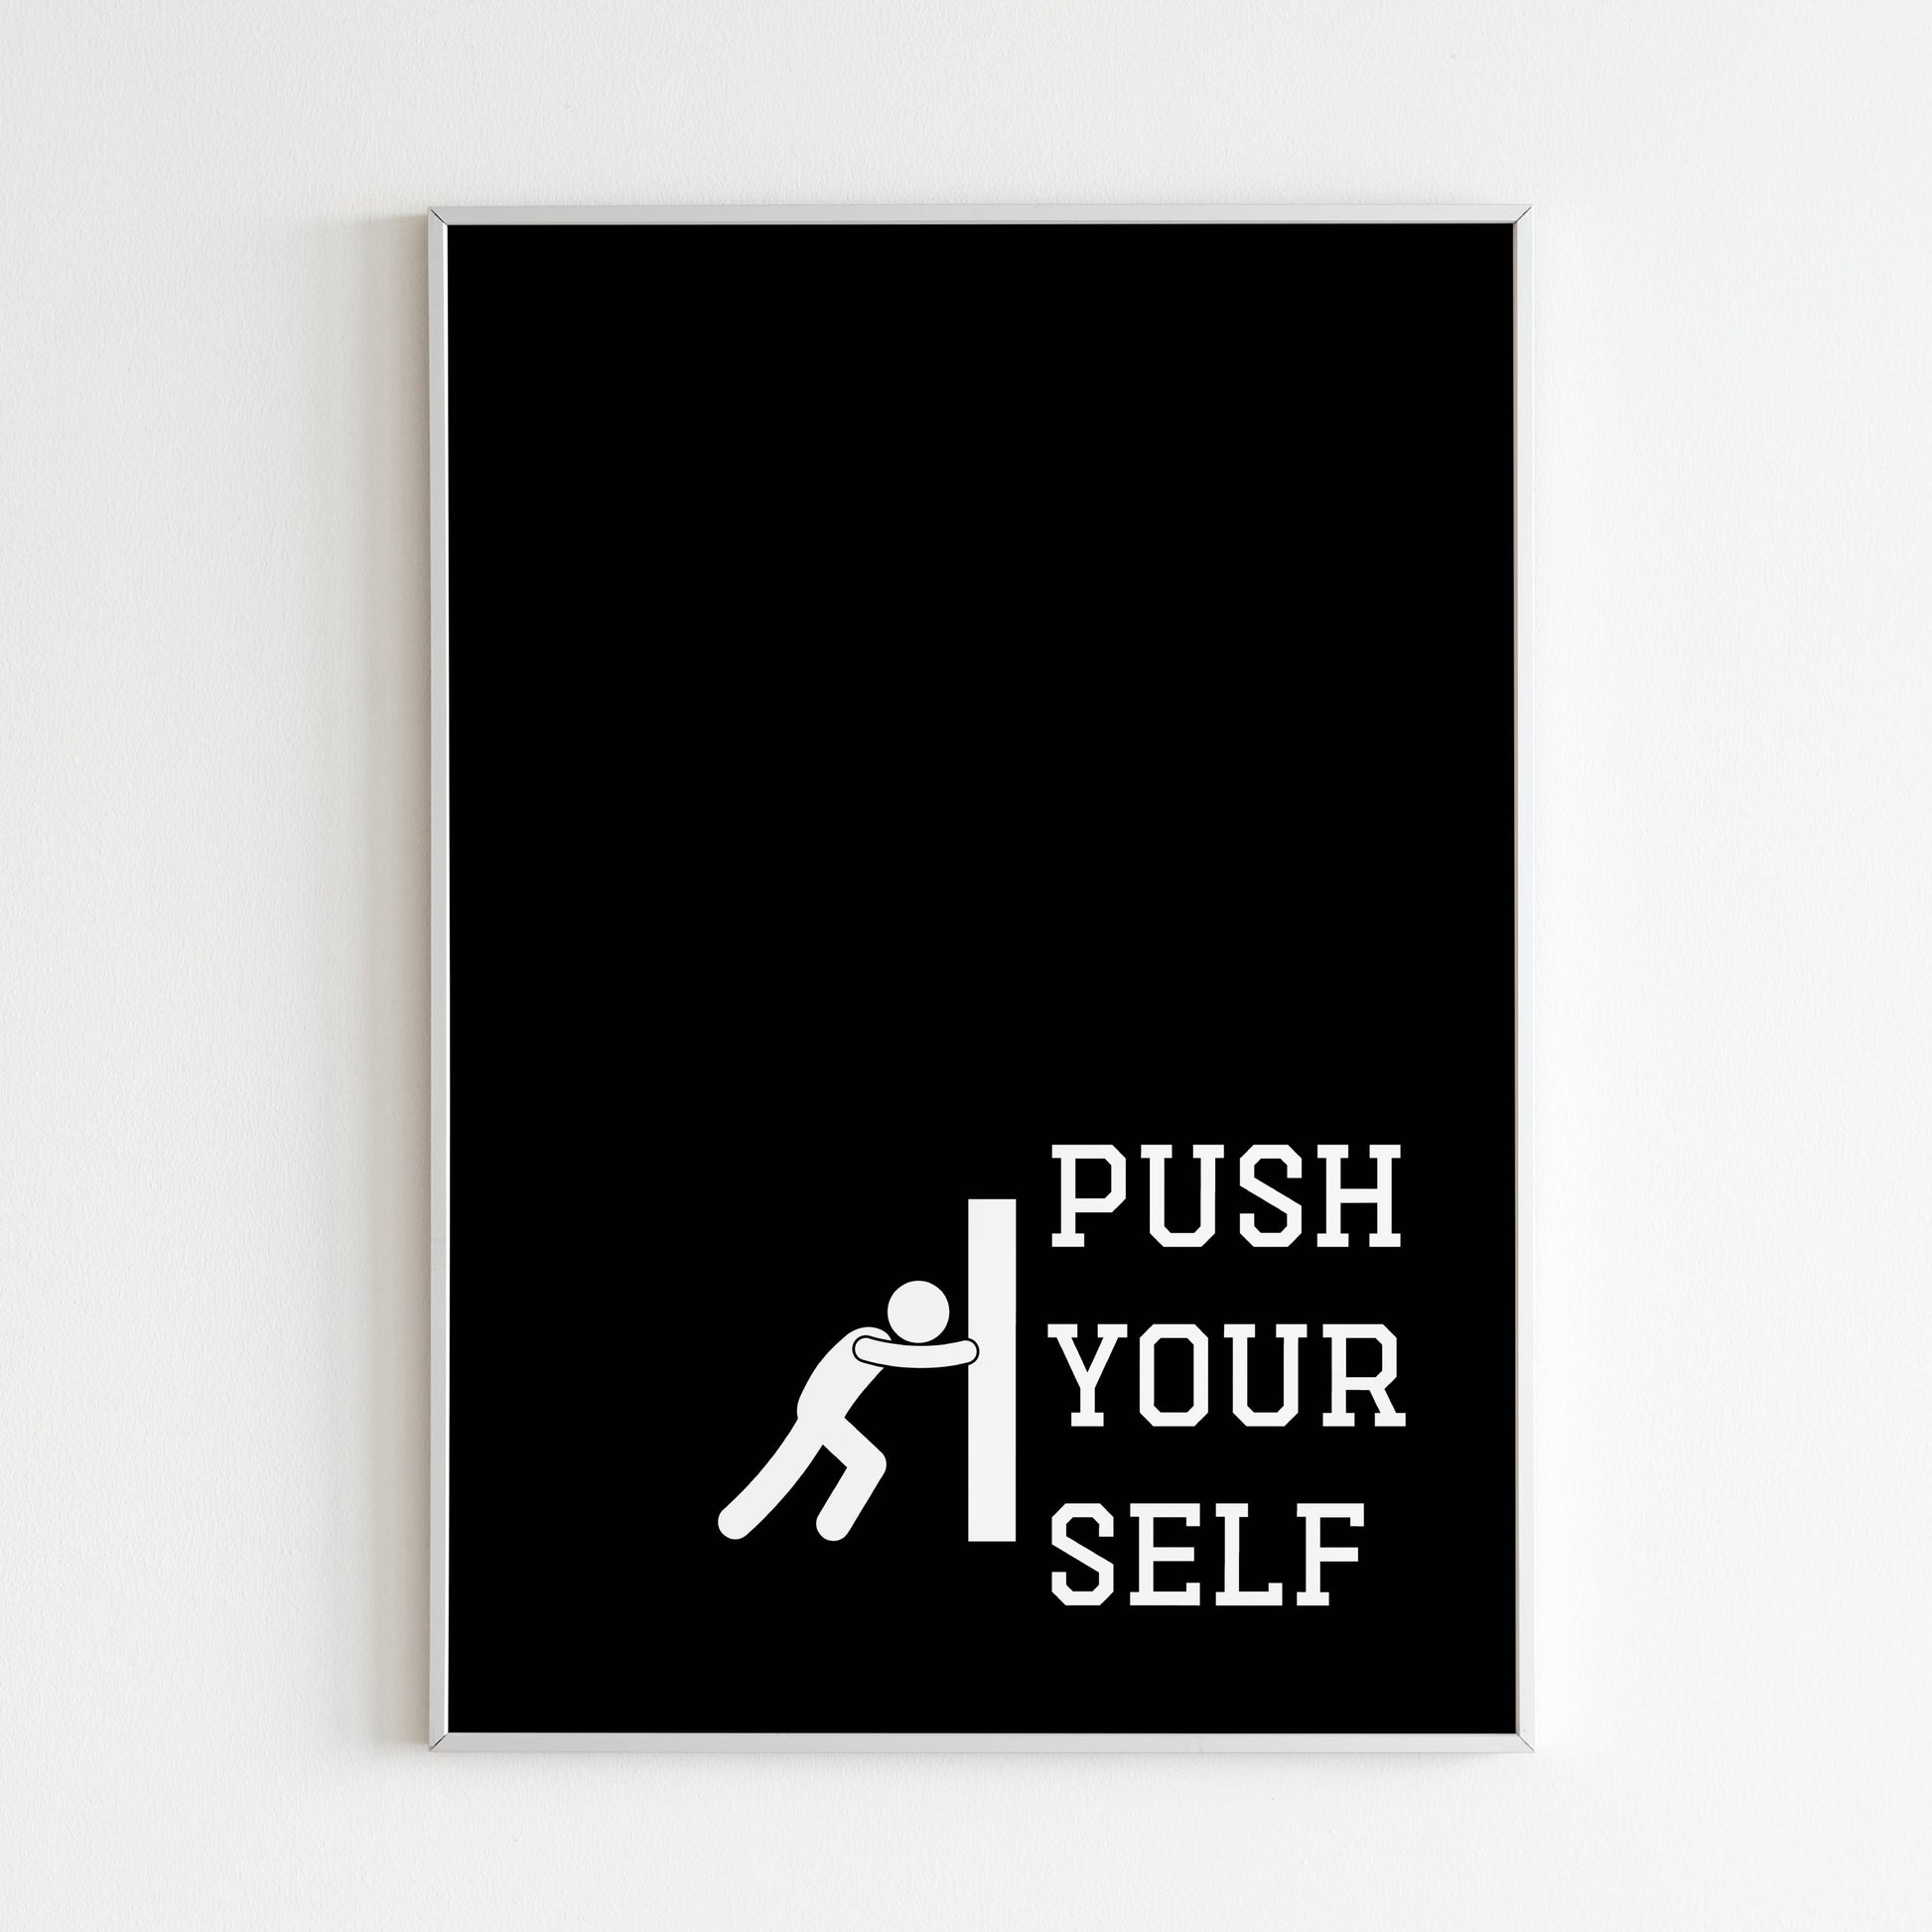 Downloadable "Push yourself" wall art for a reminder to keep striving.